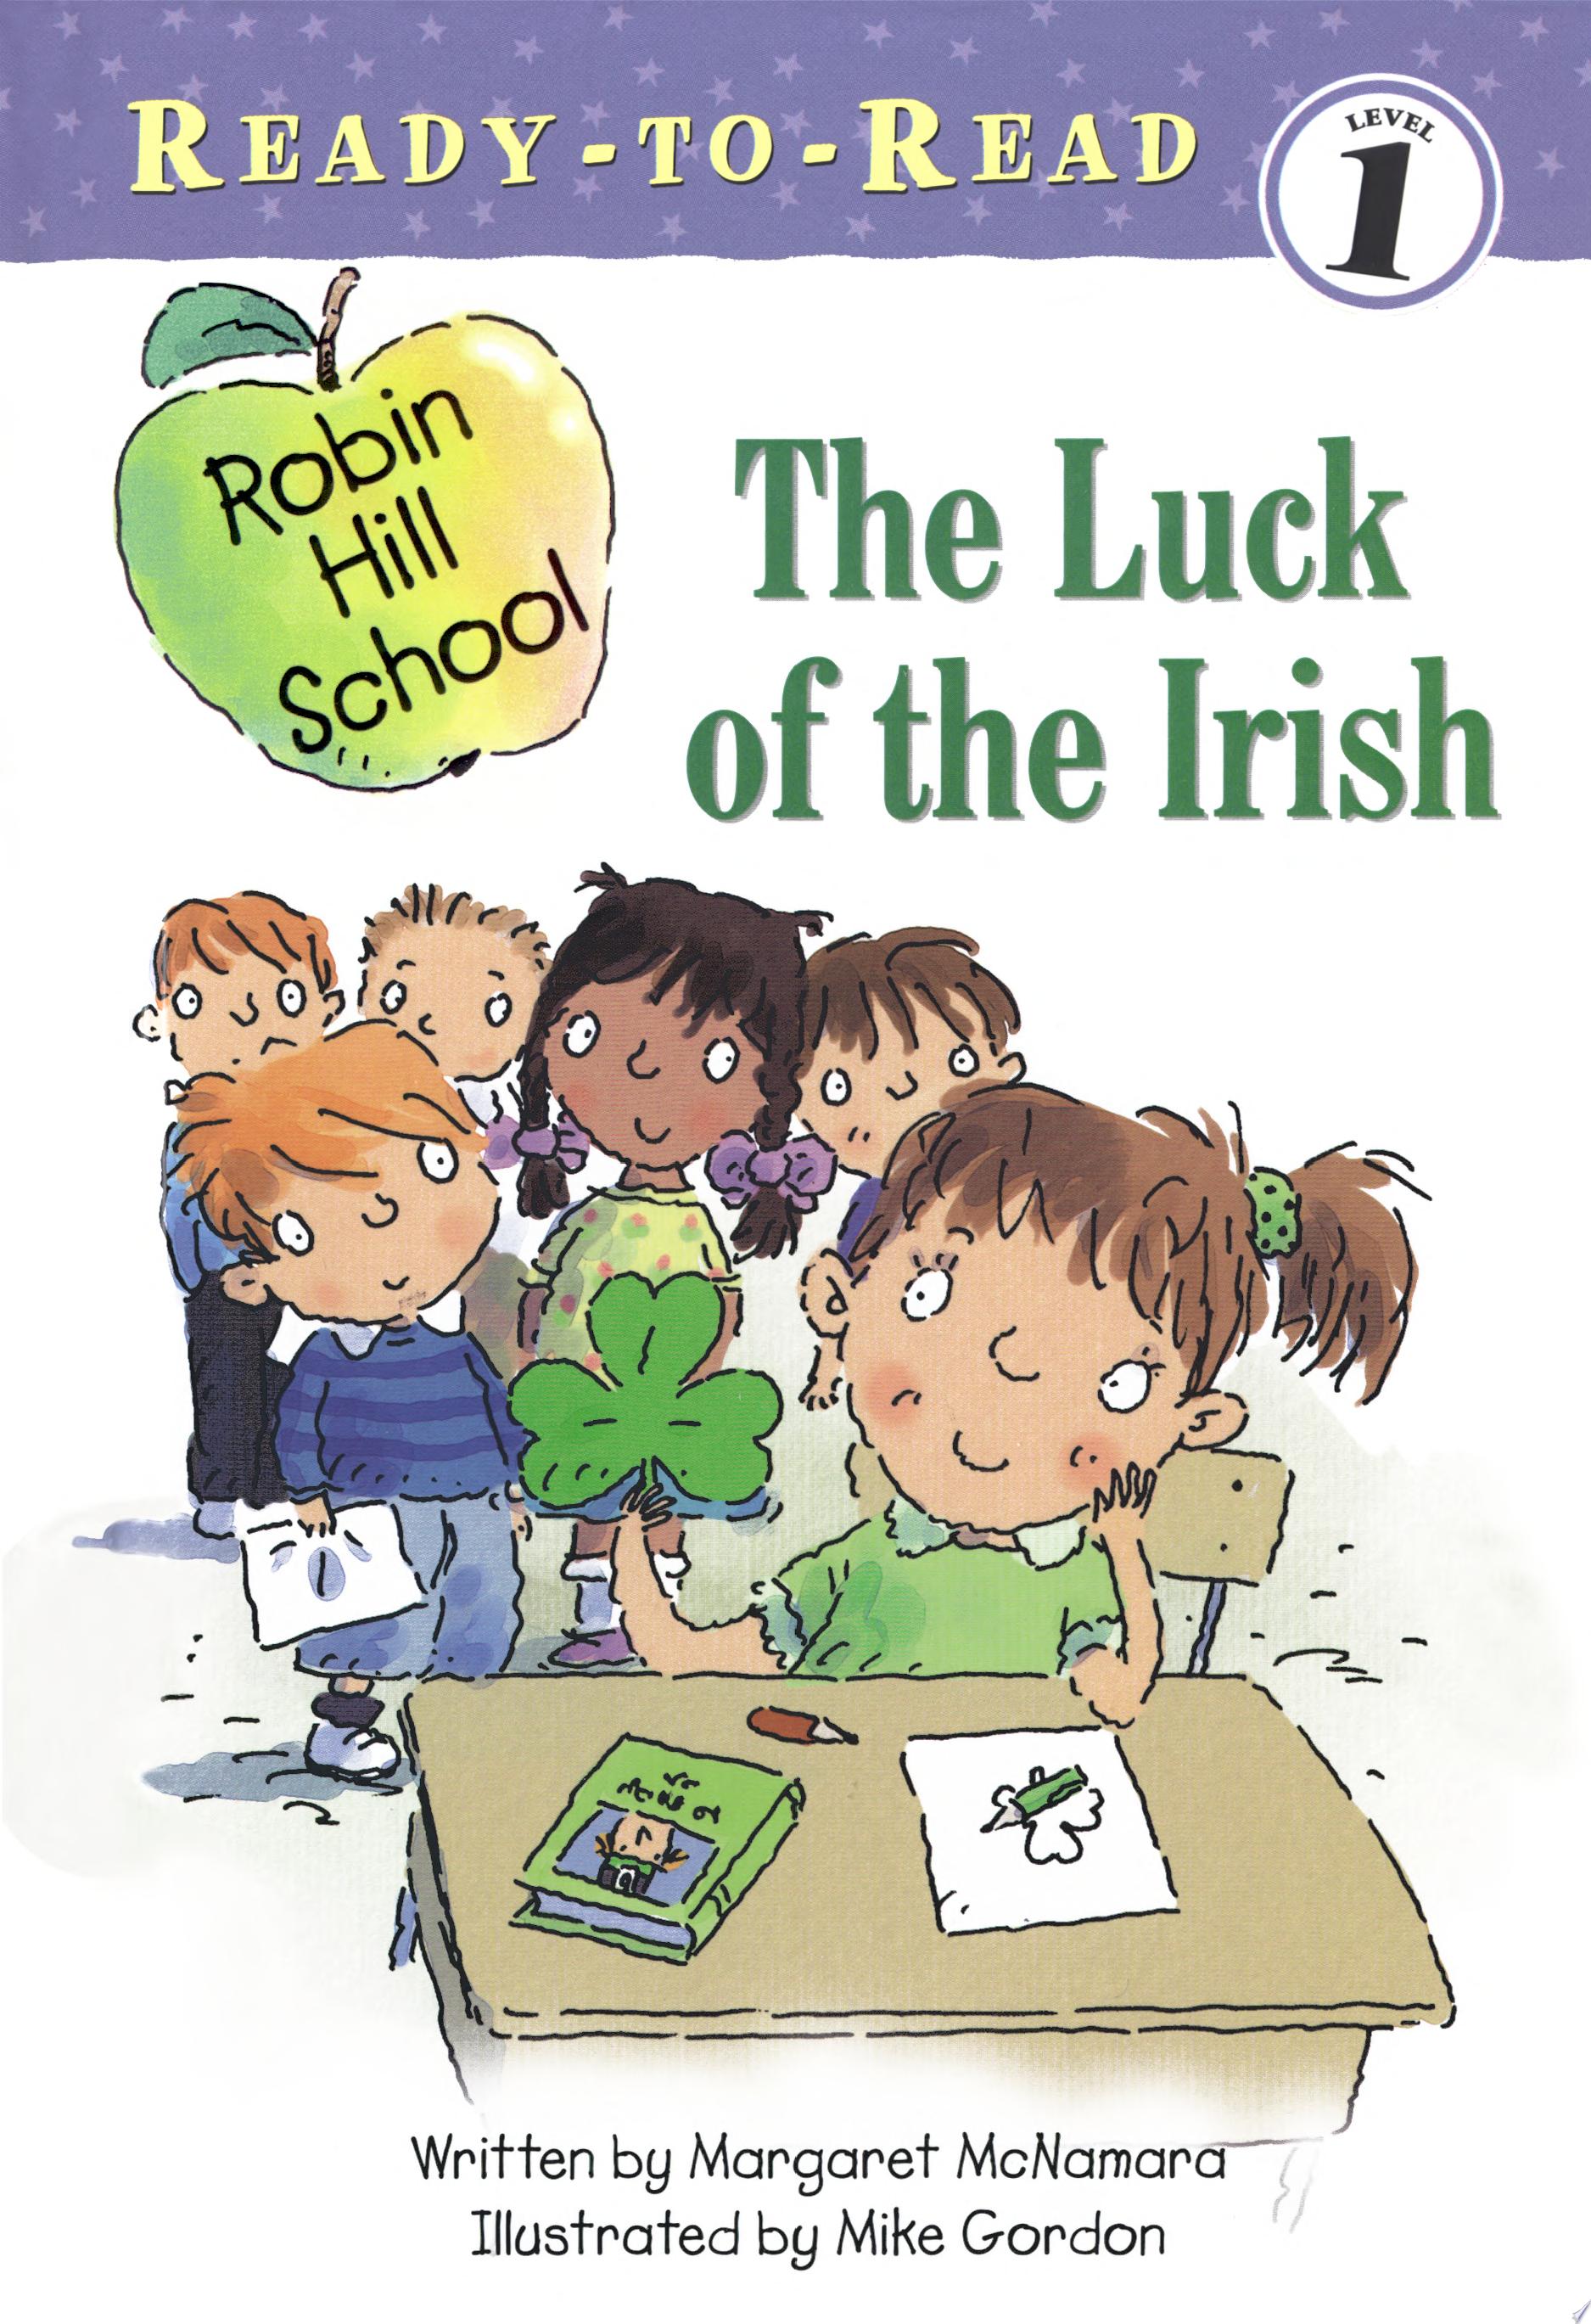 Image for "The Luck of the Irish"